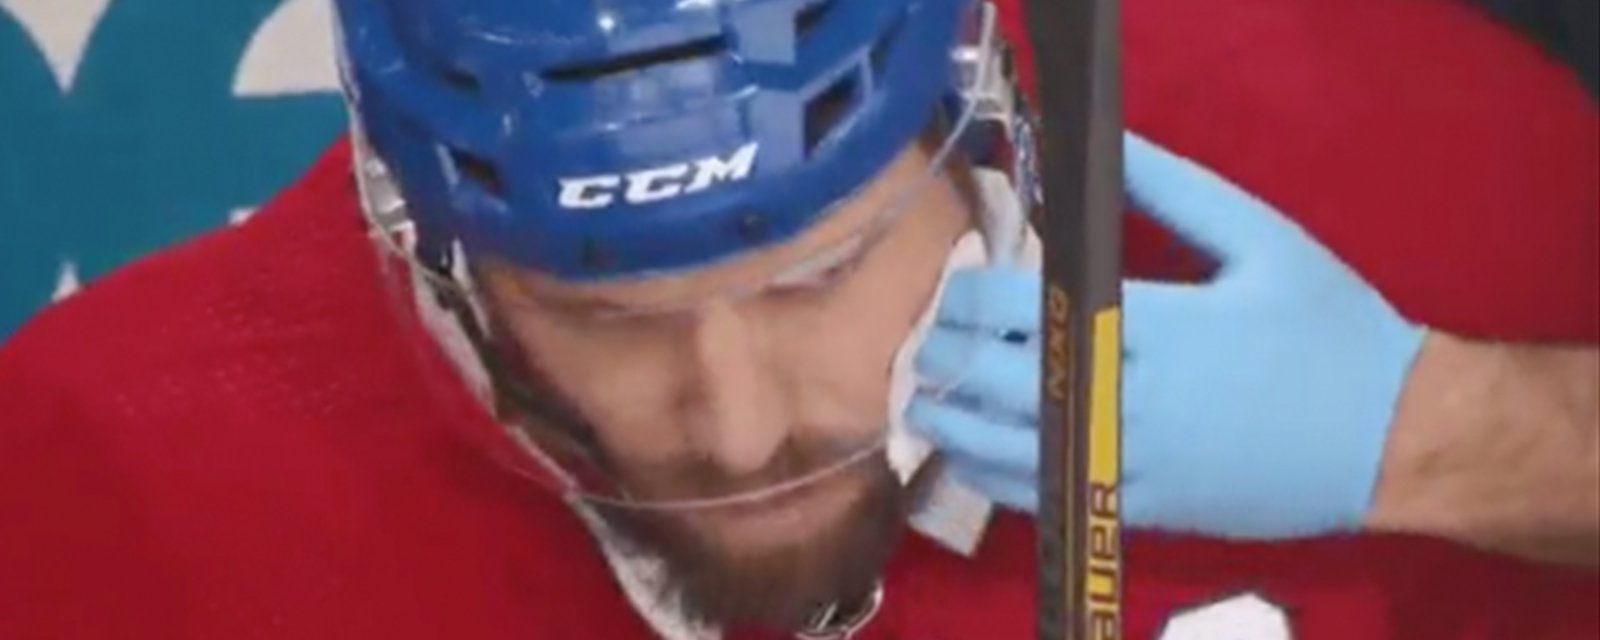 Shea Weber takes a puck to the face, is forced to leave the game